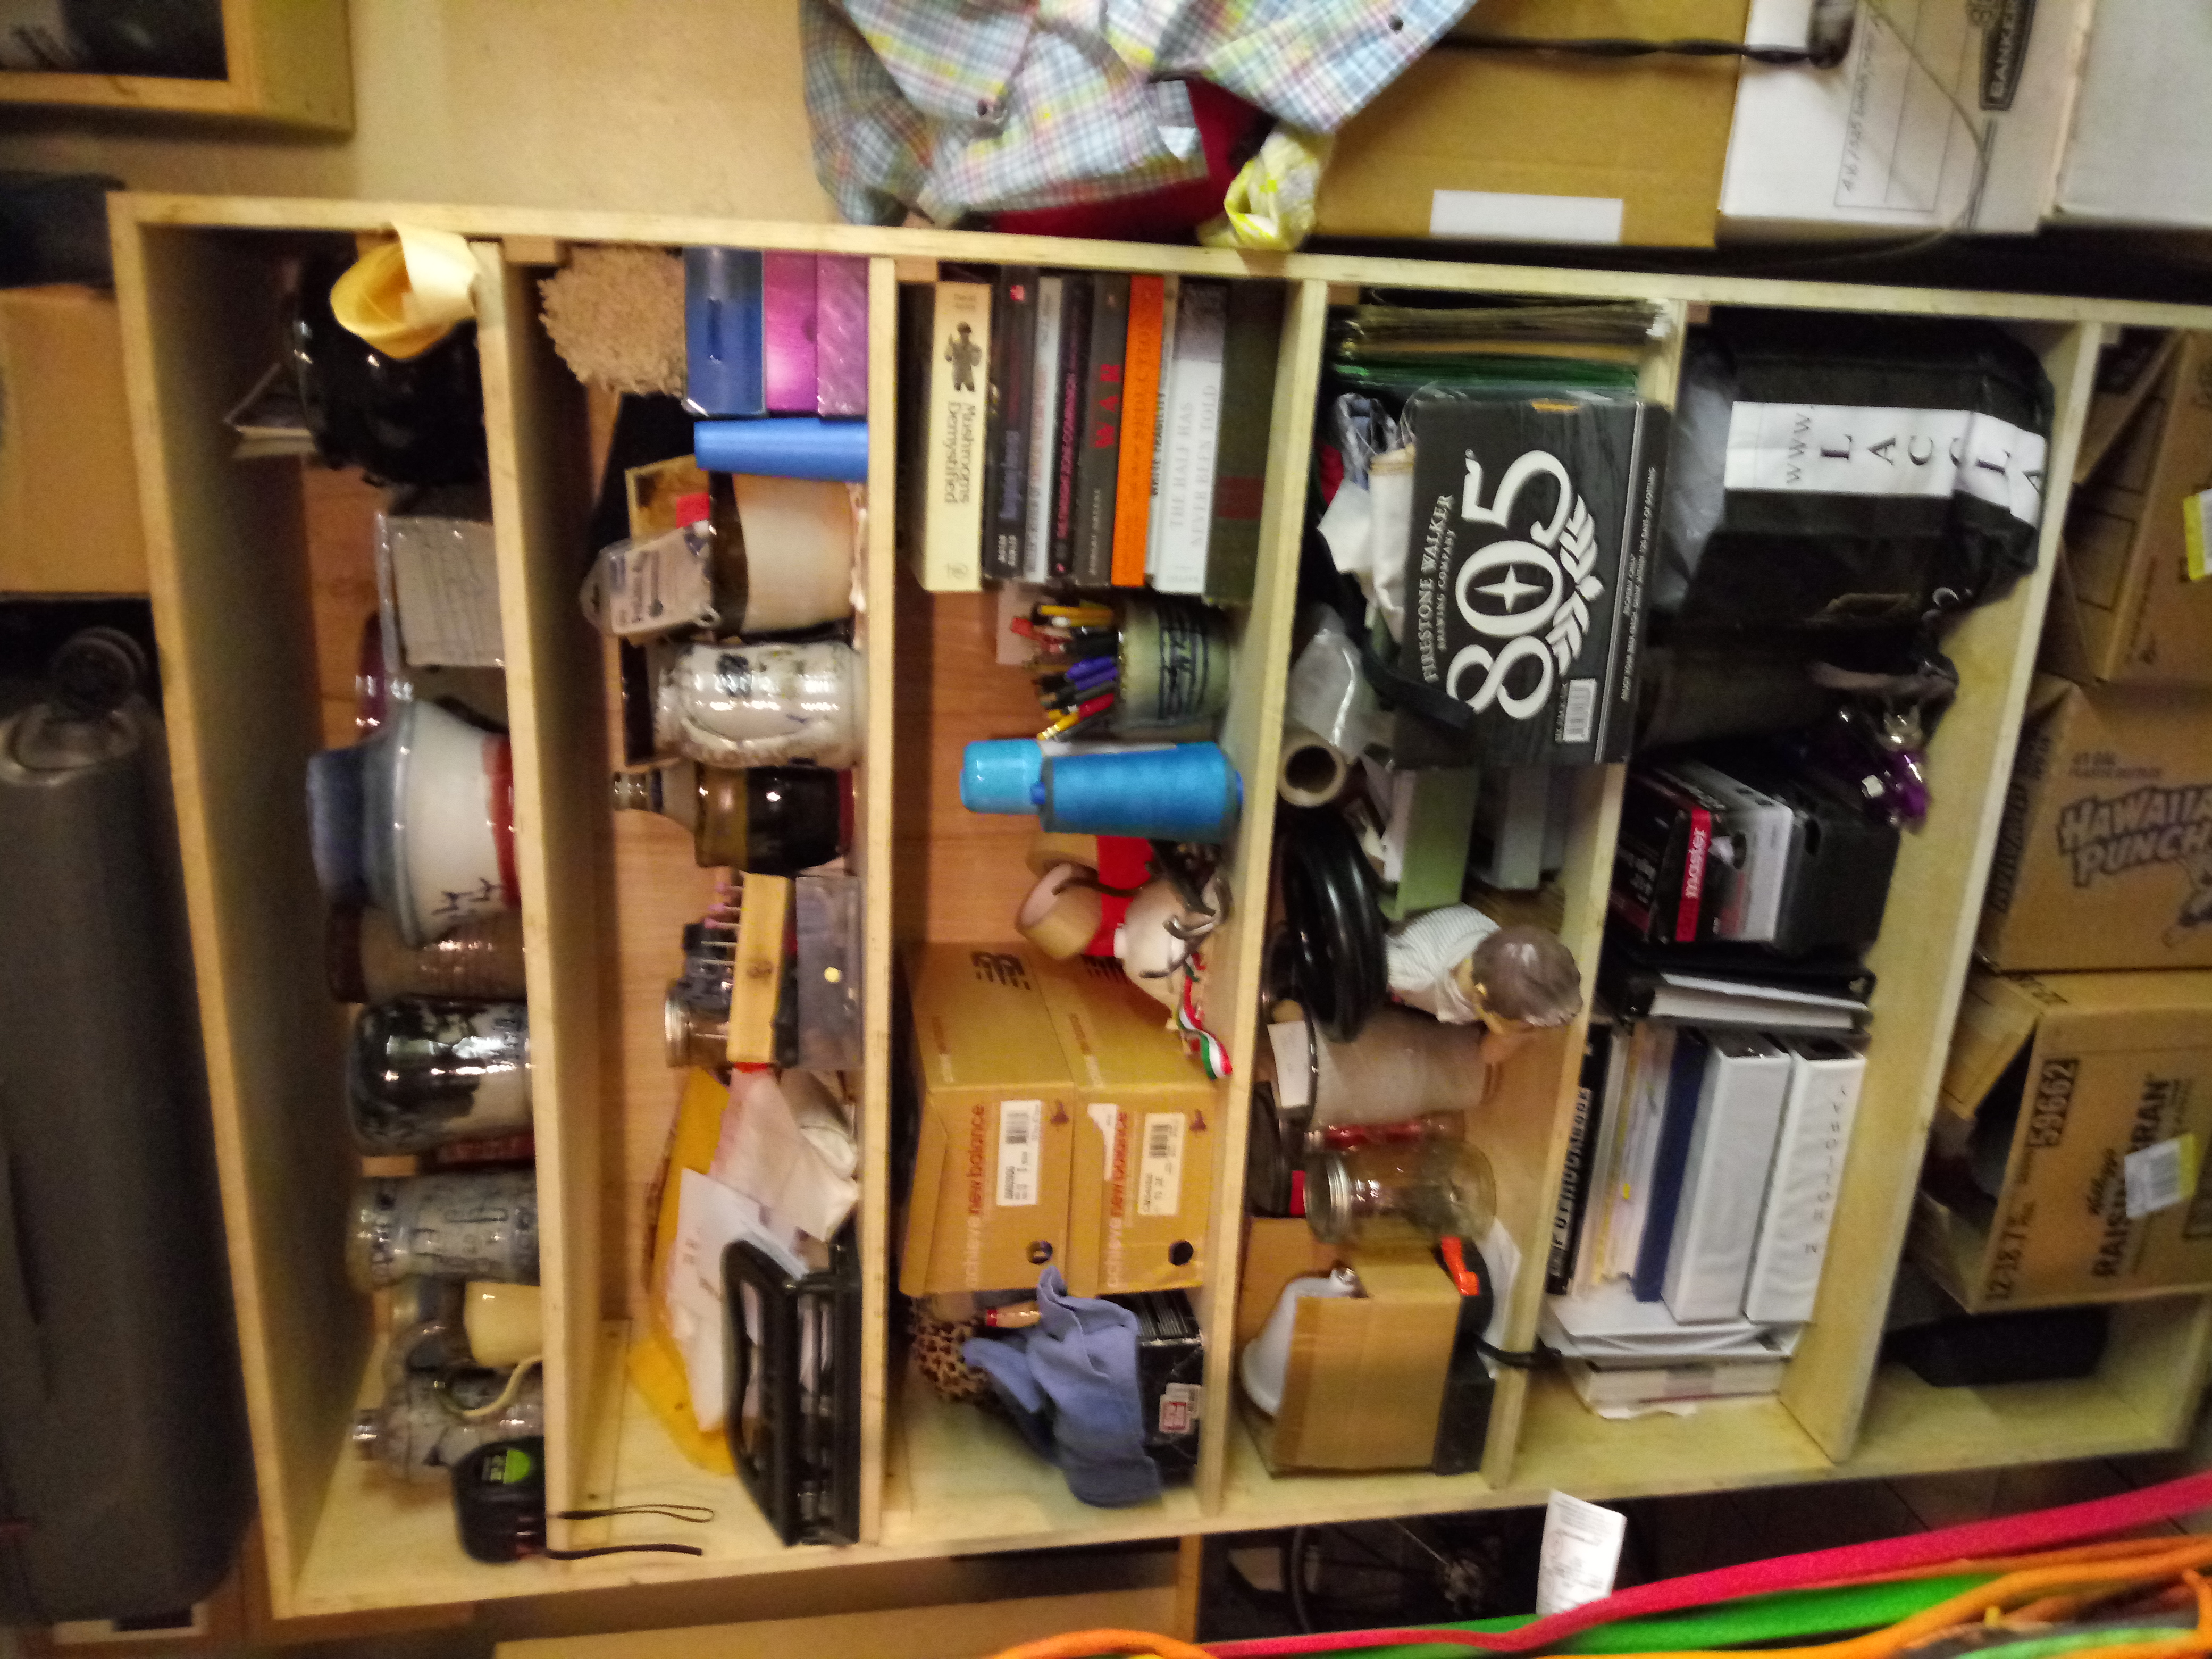 Shelf of miscellaneous sewing, jewelry, and other raw materials and tools